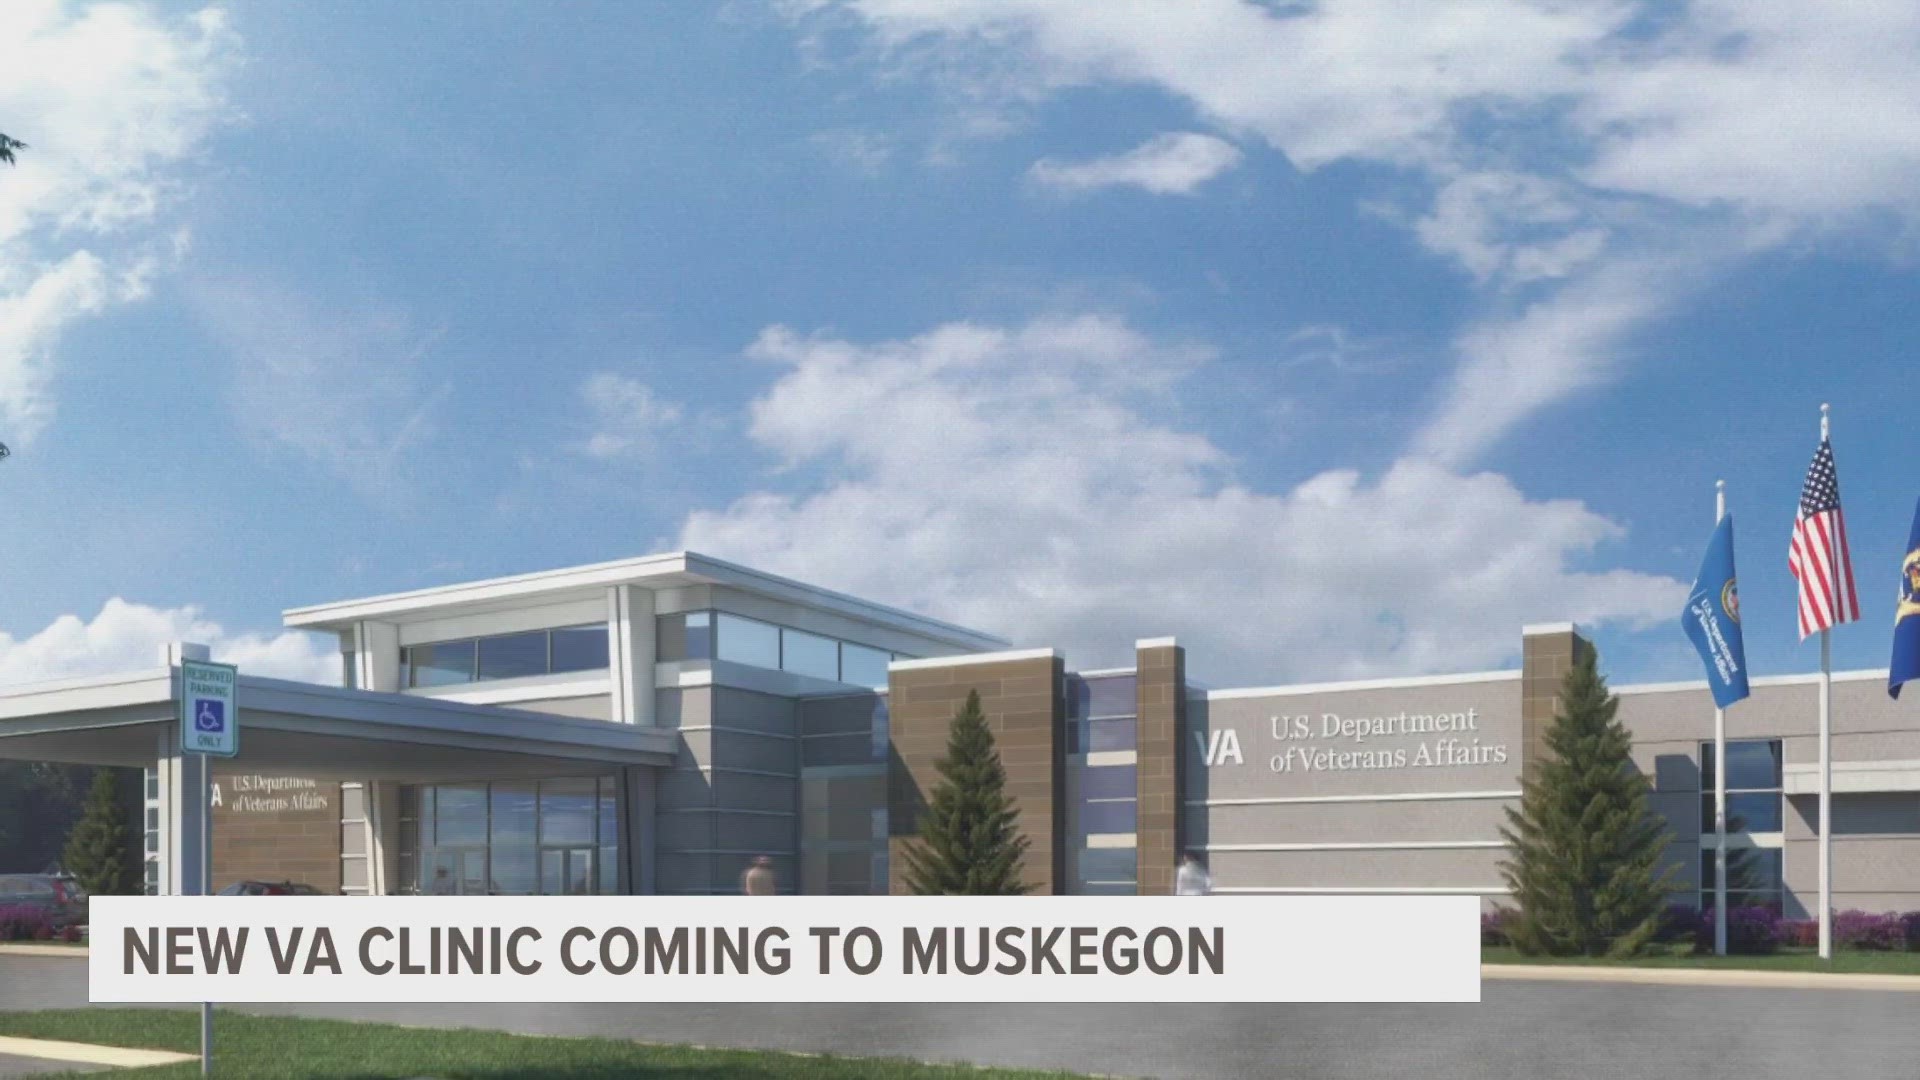 The nearly $14 million community-based outpatient center is being funded through the Battle Creek VA Medical Center.